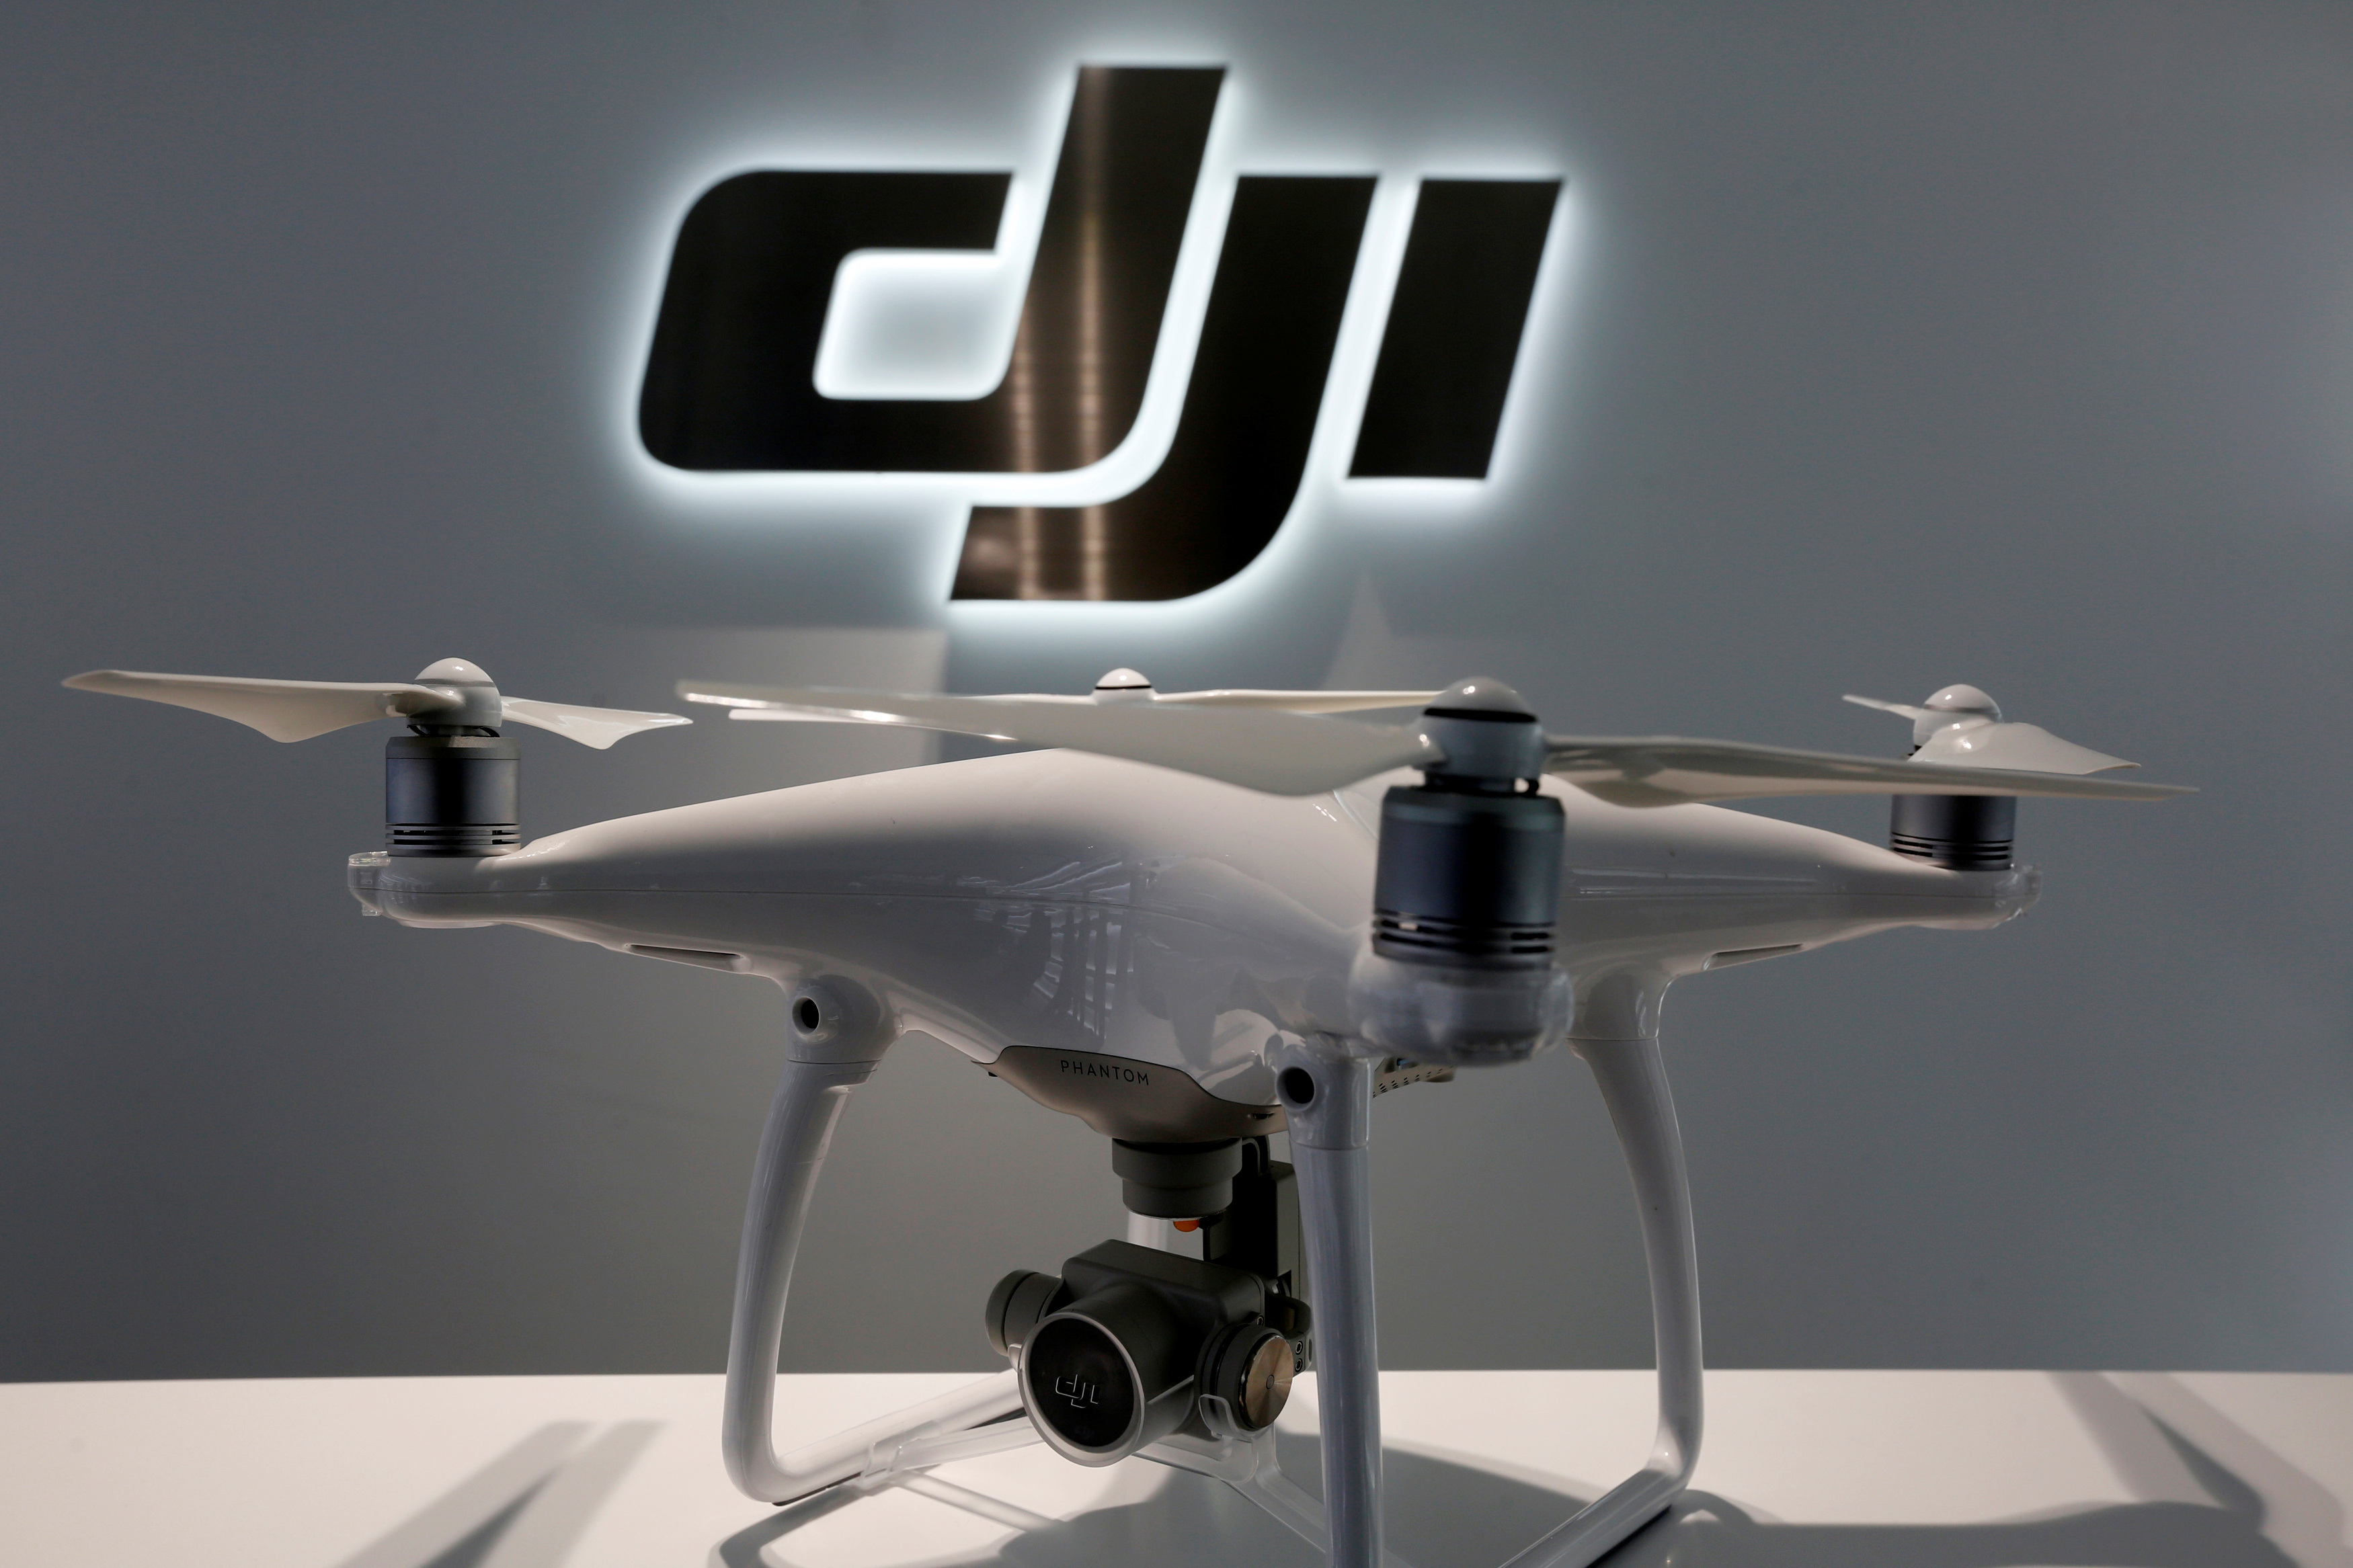 Lawmakers want Biden to reject export licenses for Chinese drone maker DJI